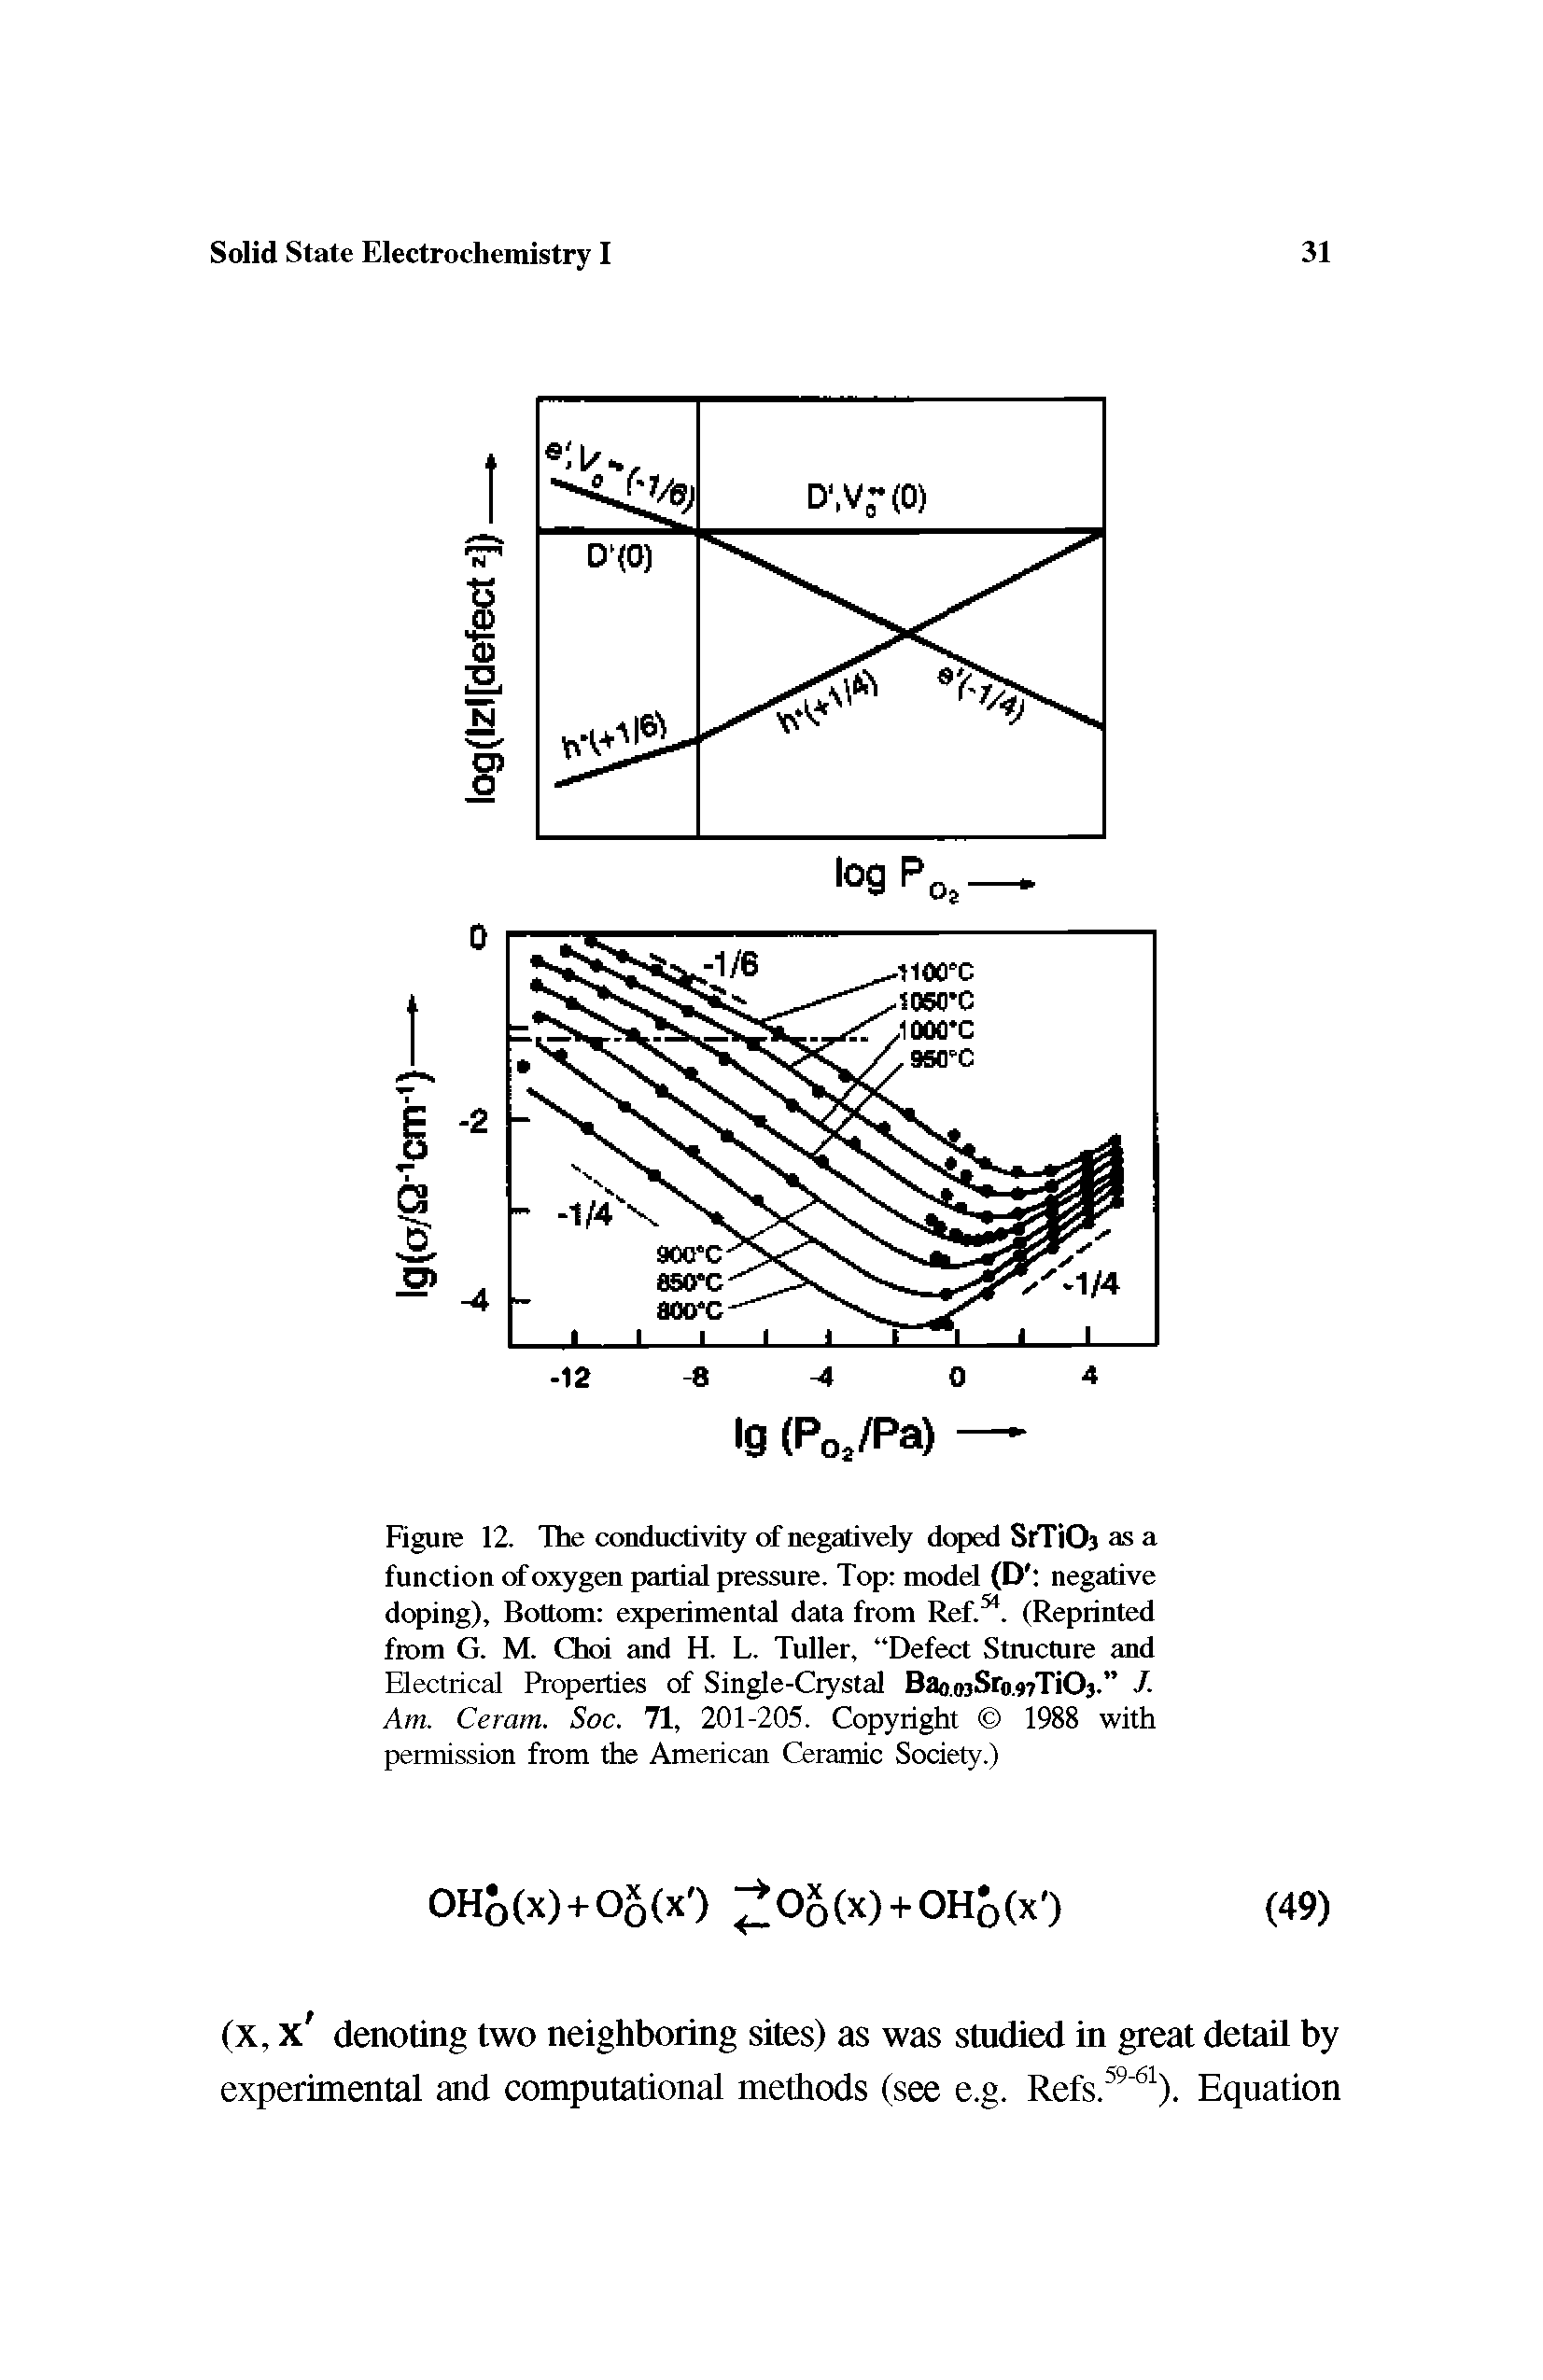 Figure 12. The conductivity of negatively doped SrTiOj as a function of oxygen partial pressure. Top model (D negative doping), Bottom experimental data from Ref.51. (Reprinted from G. M. Choi and H. L. Tuller, Defect Structure and Electrical Properties of Single-Crystal Bao.ojSro. TiOj. /. Am. Ceram. Soc. 71, 201-205. Copyright 1988 with permission from the American Ceramic Society.)...